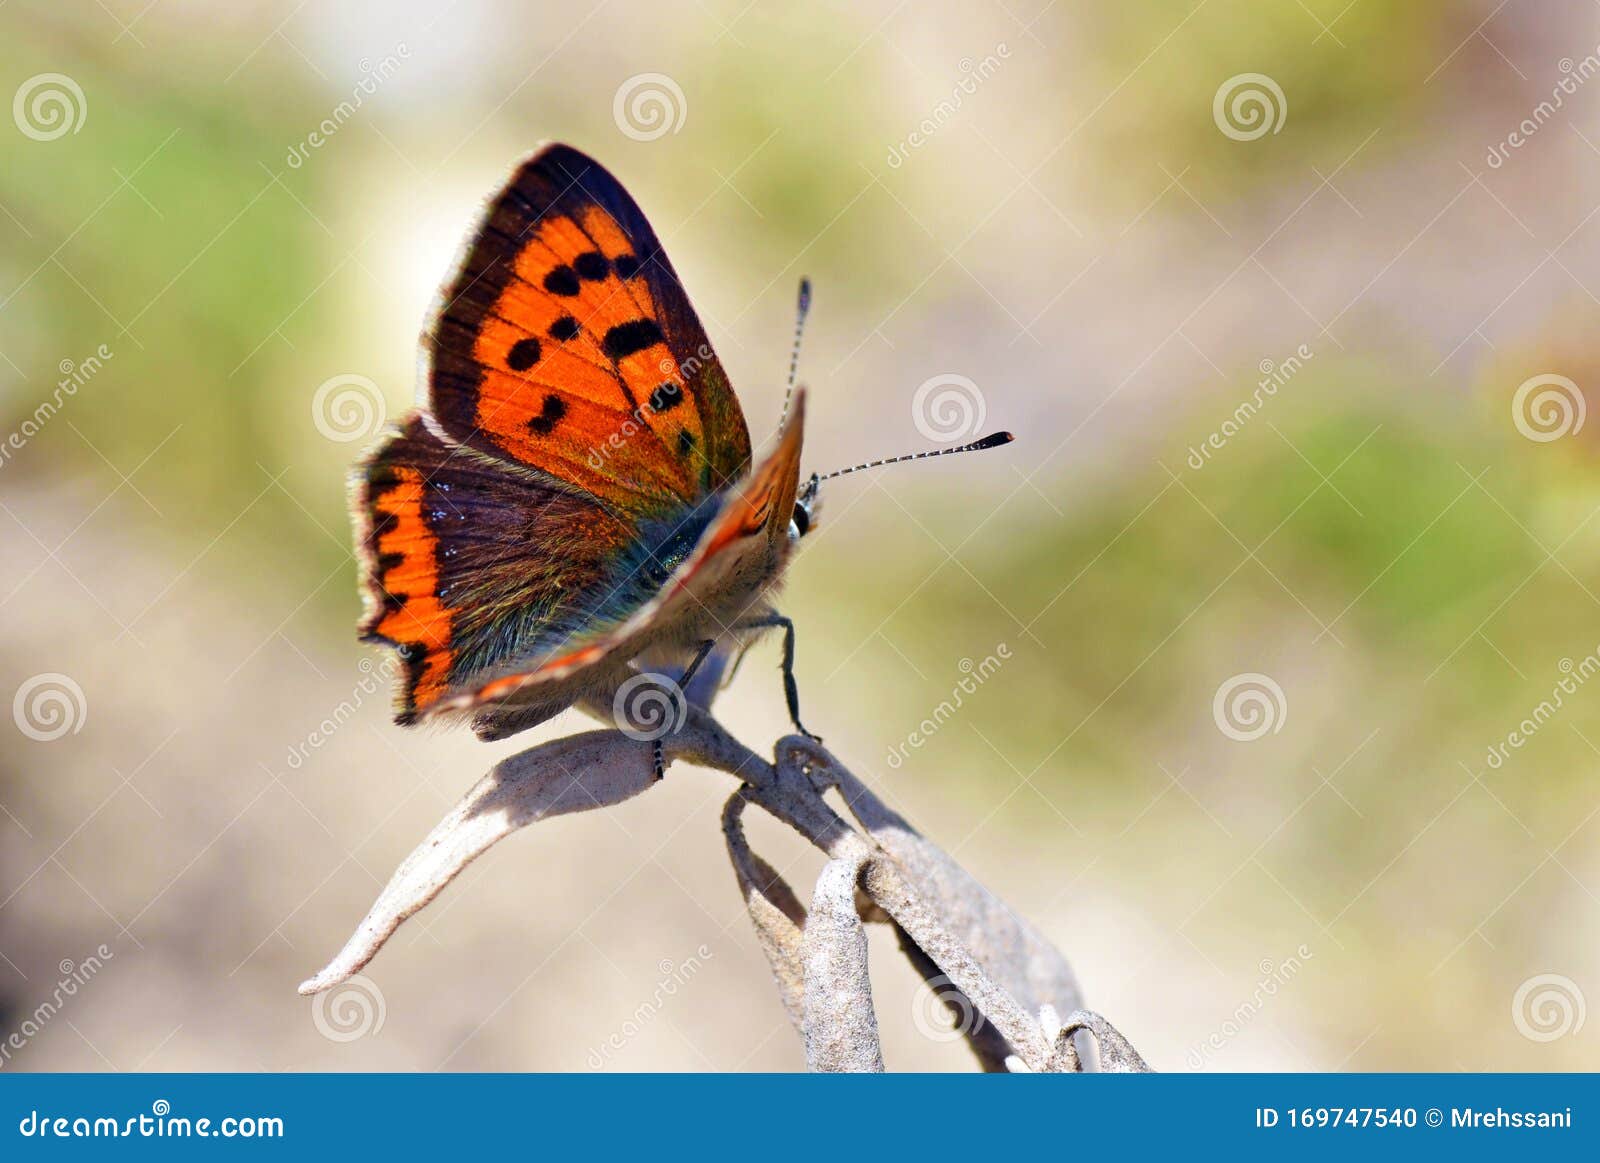 lycaena phlaeas , the small copper butterfly sitting on dry plant